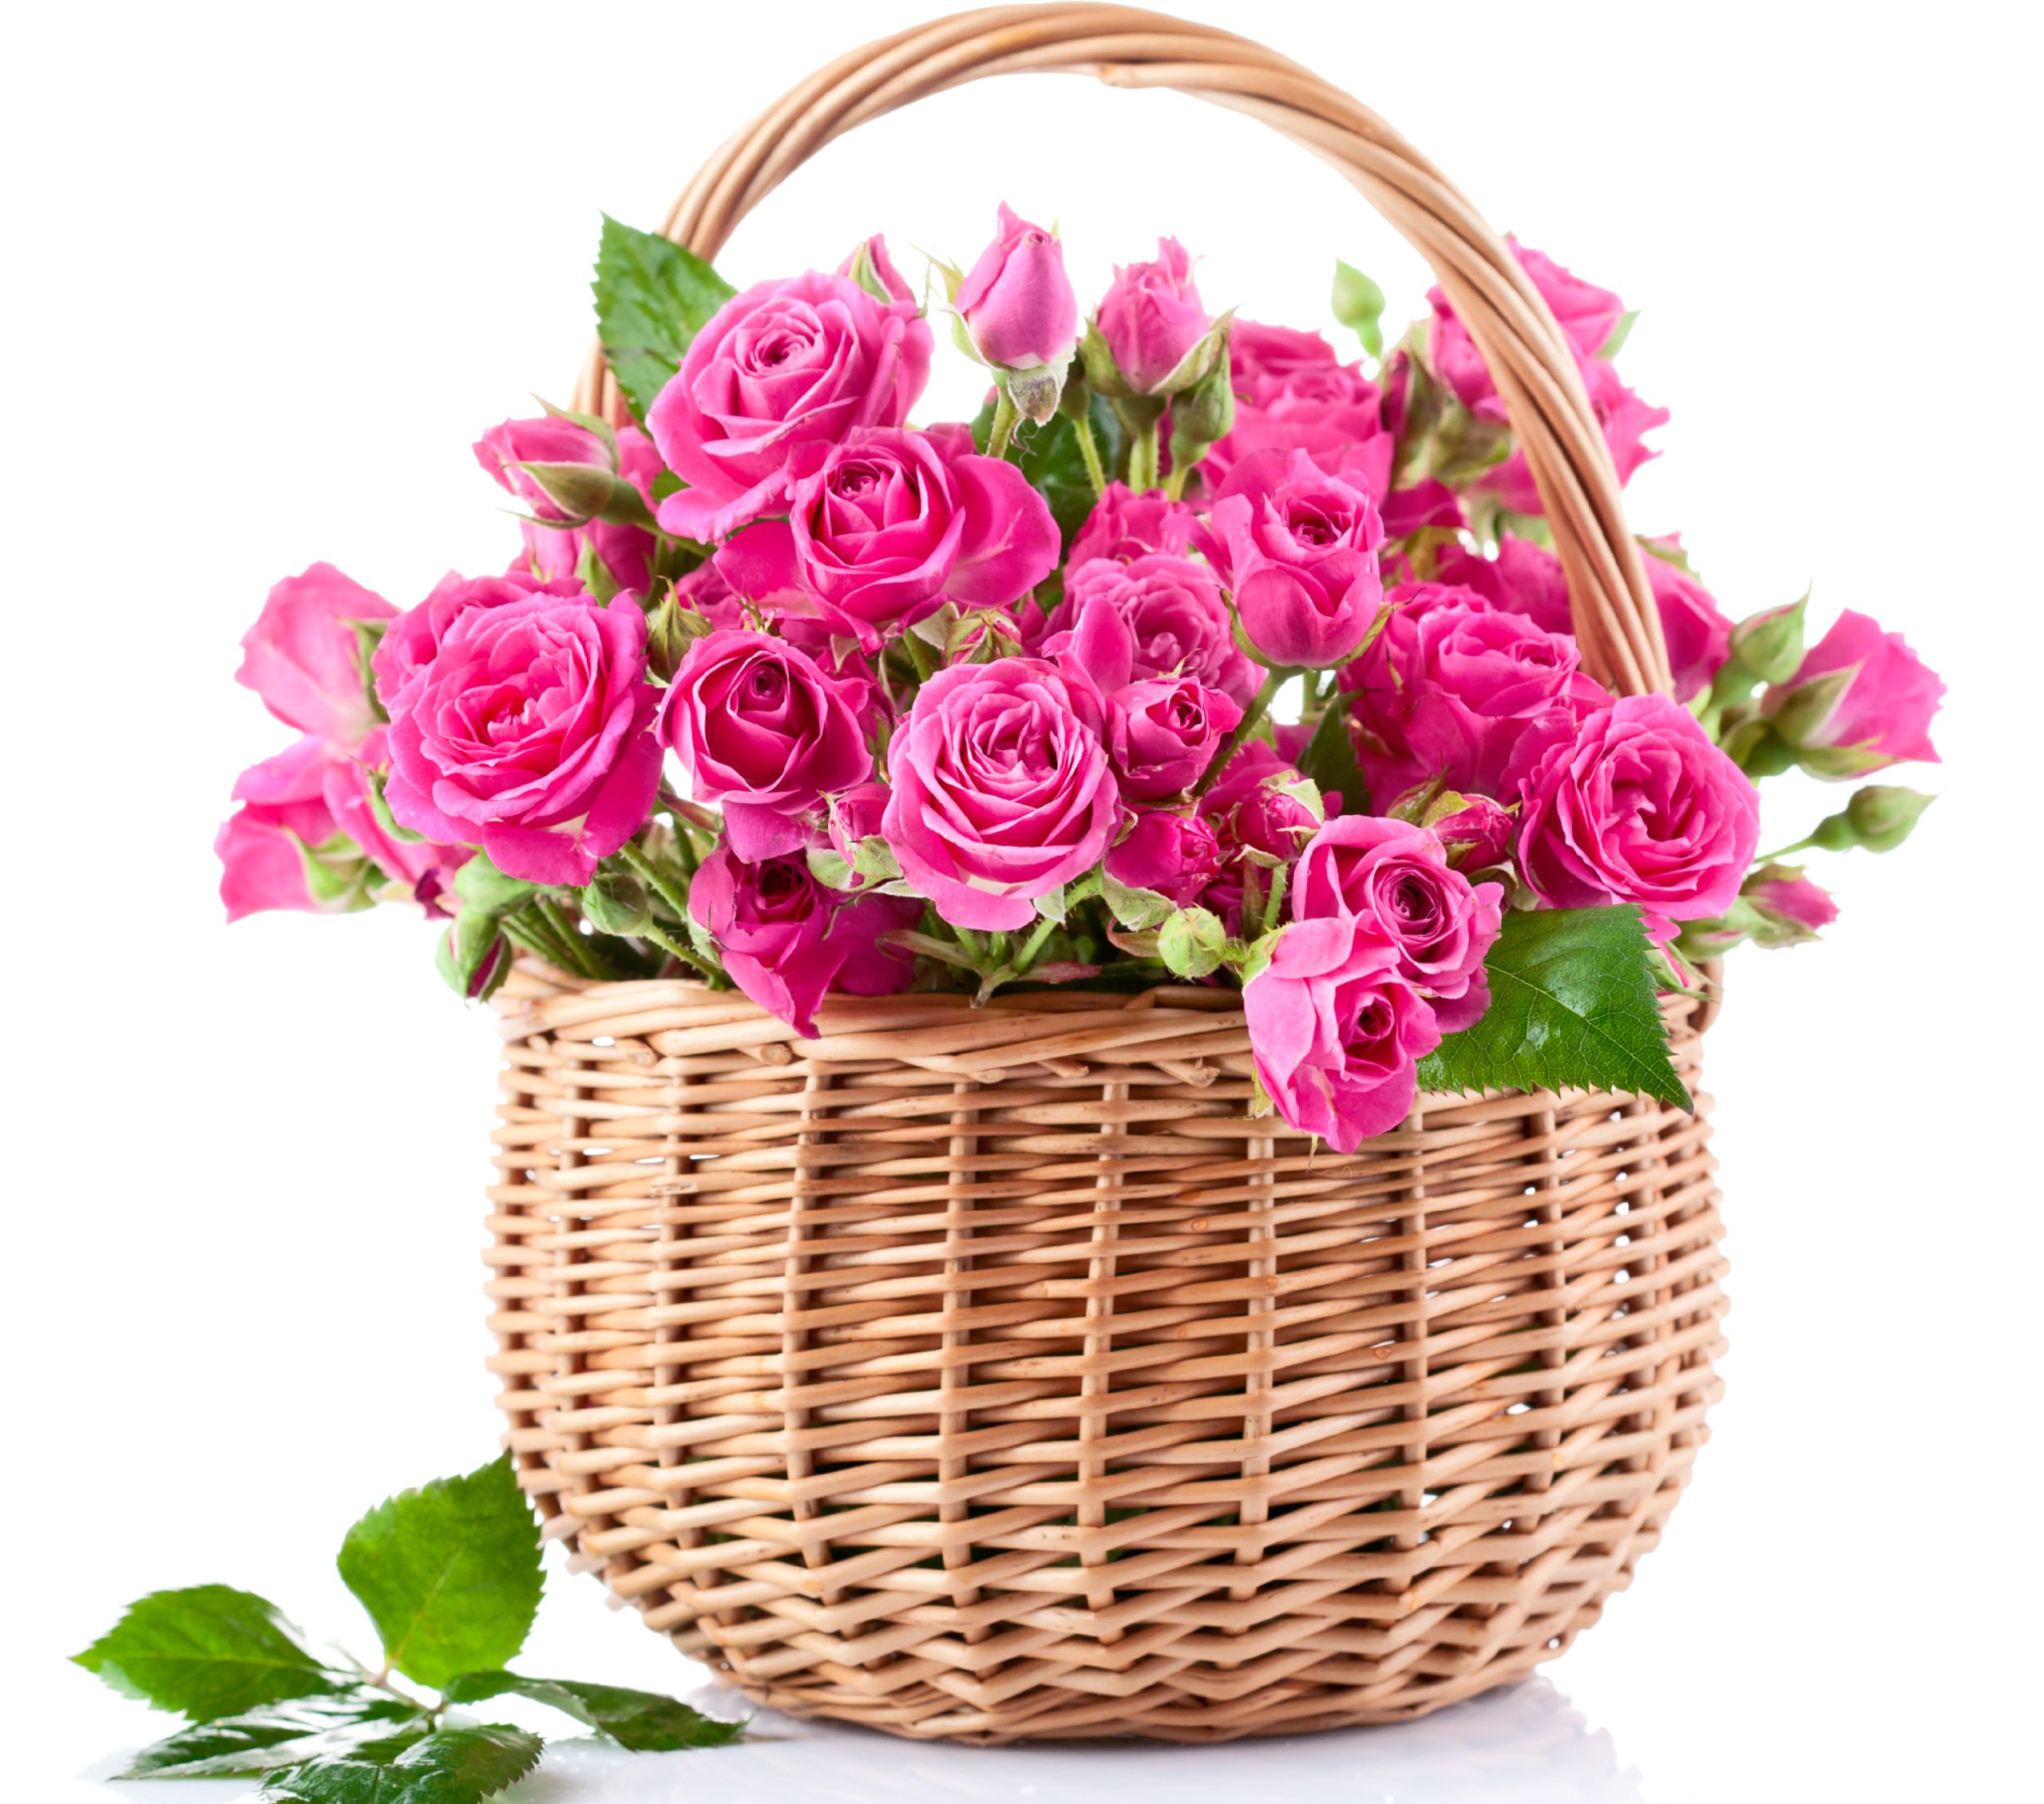 Pink Roses Wallpapers Flowers Pinterest Pink Roses, Rose